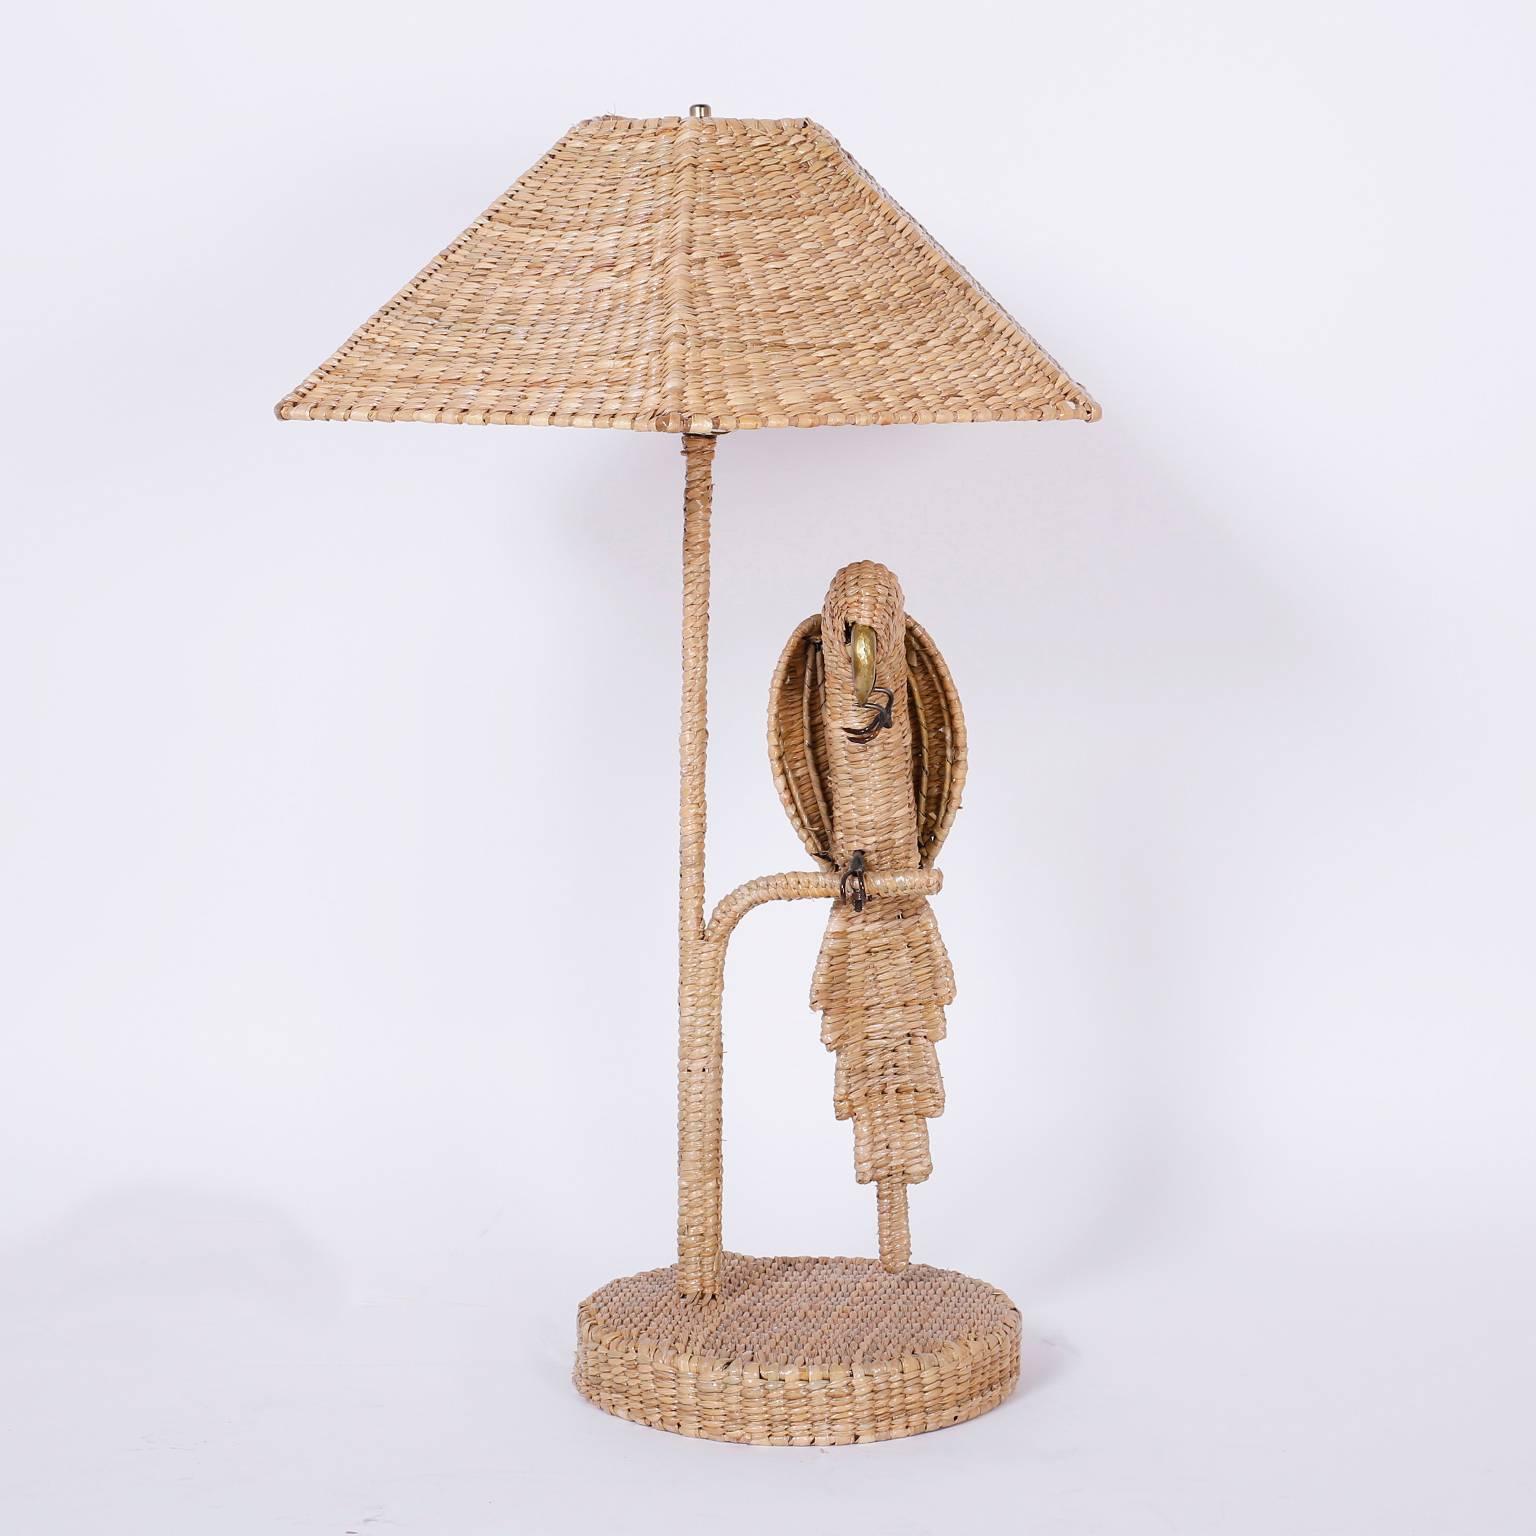 Folk Art Pair of Mario Torres Wicker Parrot Table Lamps with Wicker or Linen Shades